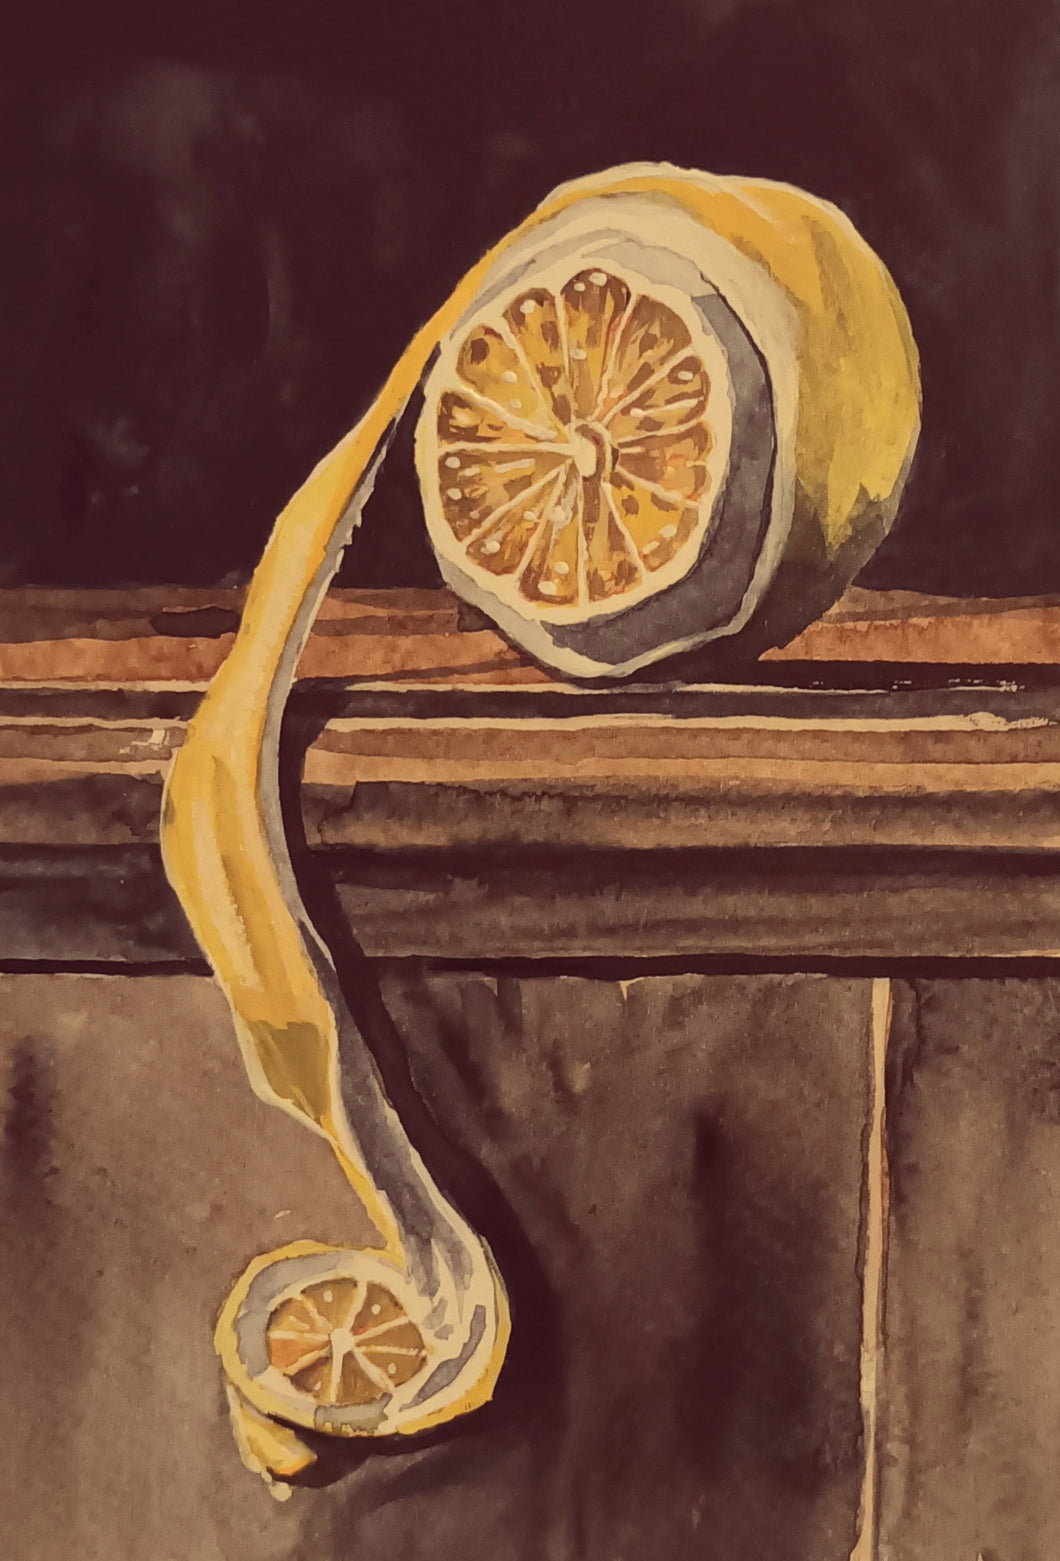 A3 Framed Original Watercolour Still Life painting of a Lemon by Cathal O'Briain.